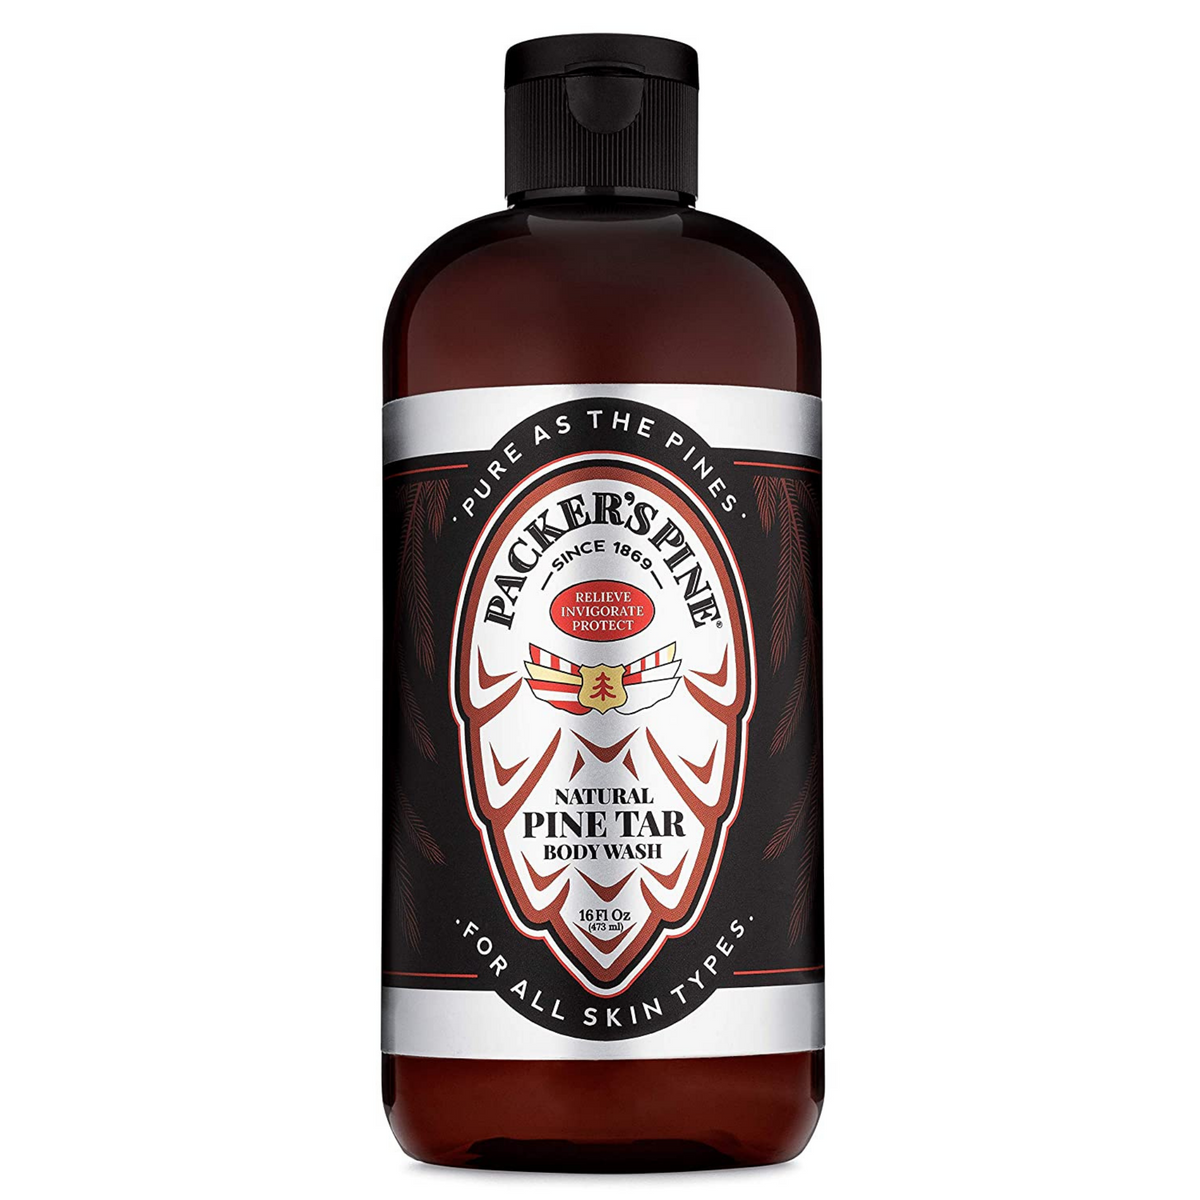 Primary Image of Natural Pine Tar Body Wash